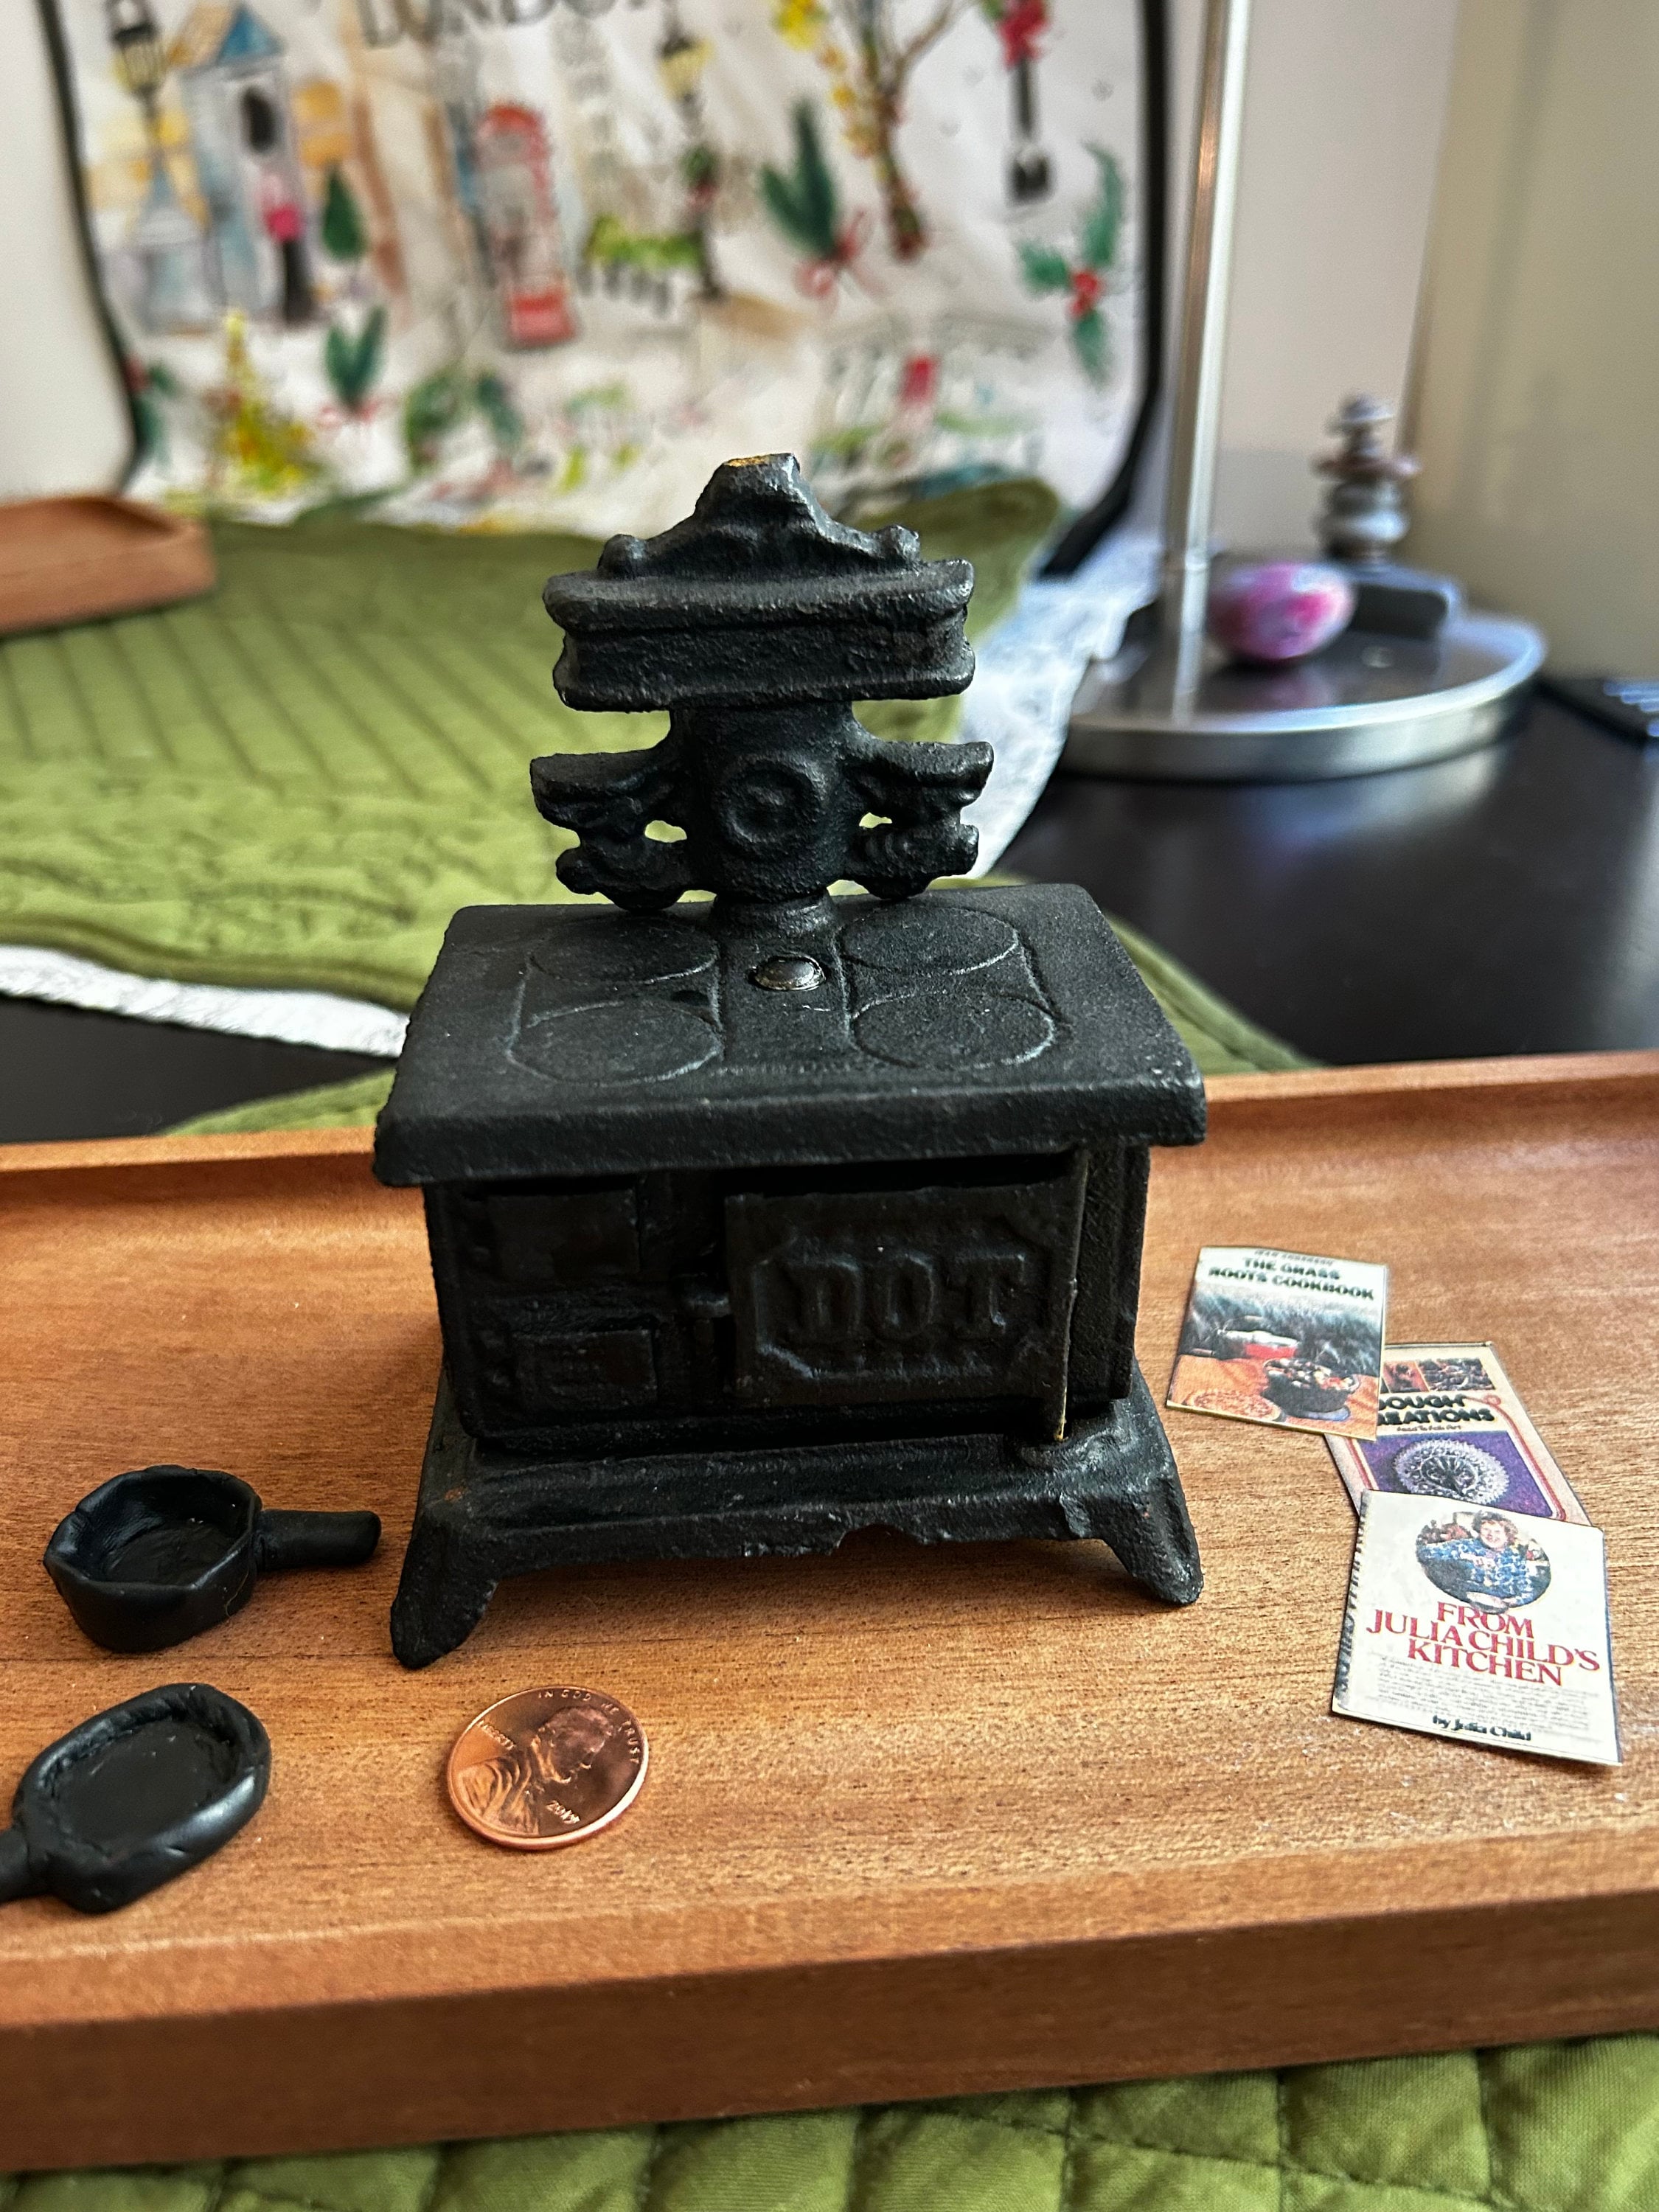 Had to make a temporary stove plate for my new mini cast iron stove.